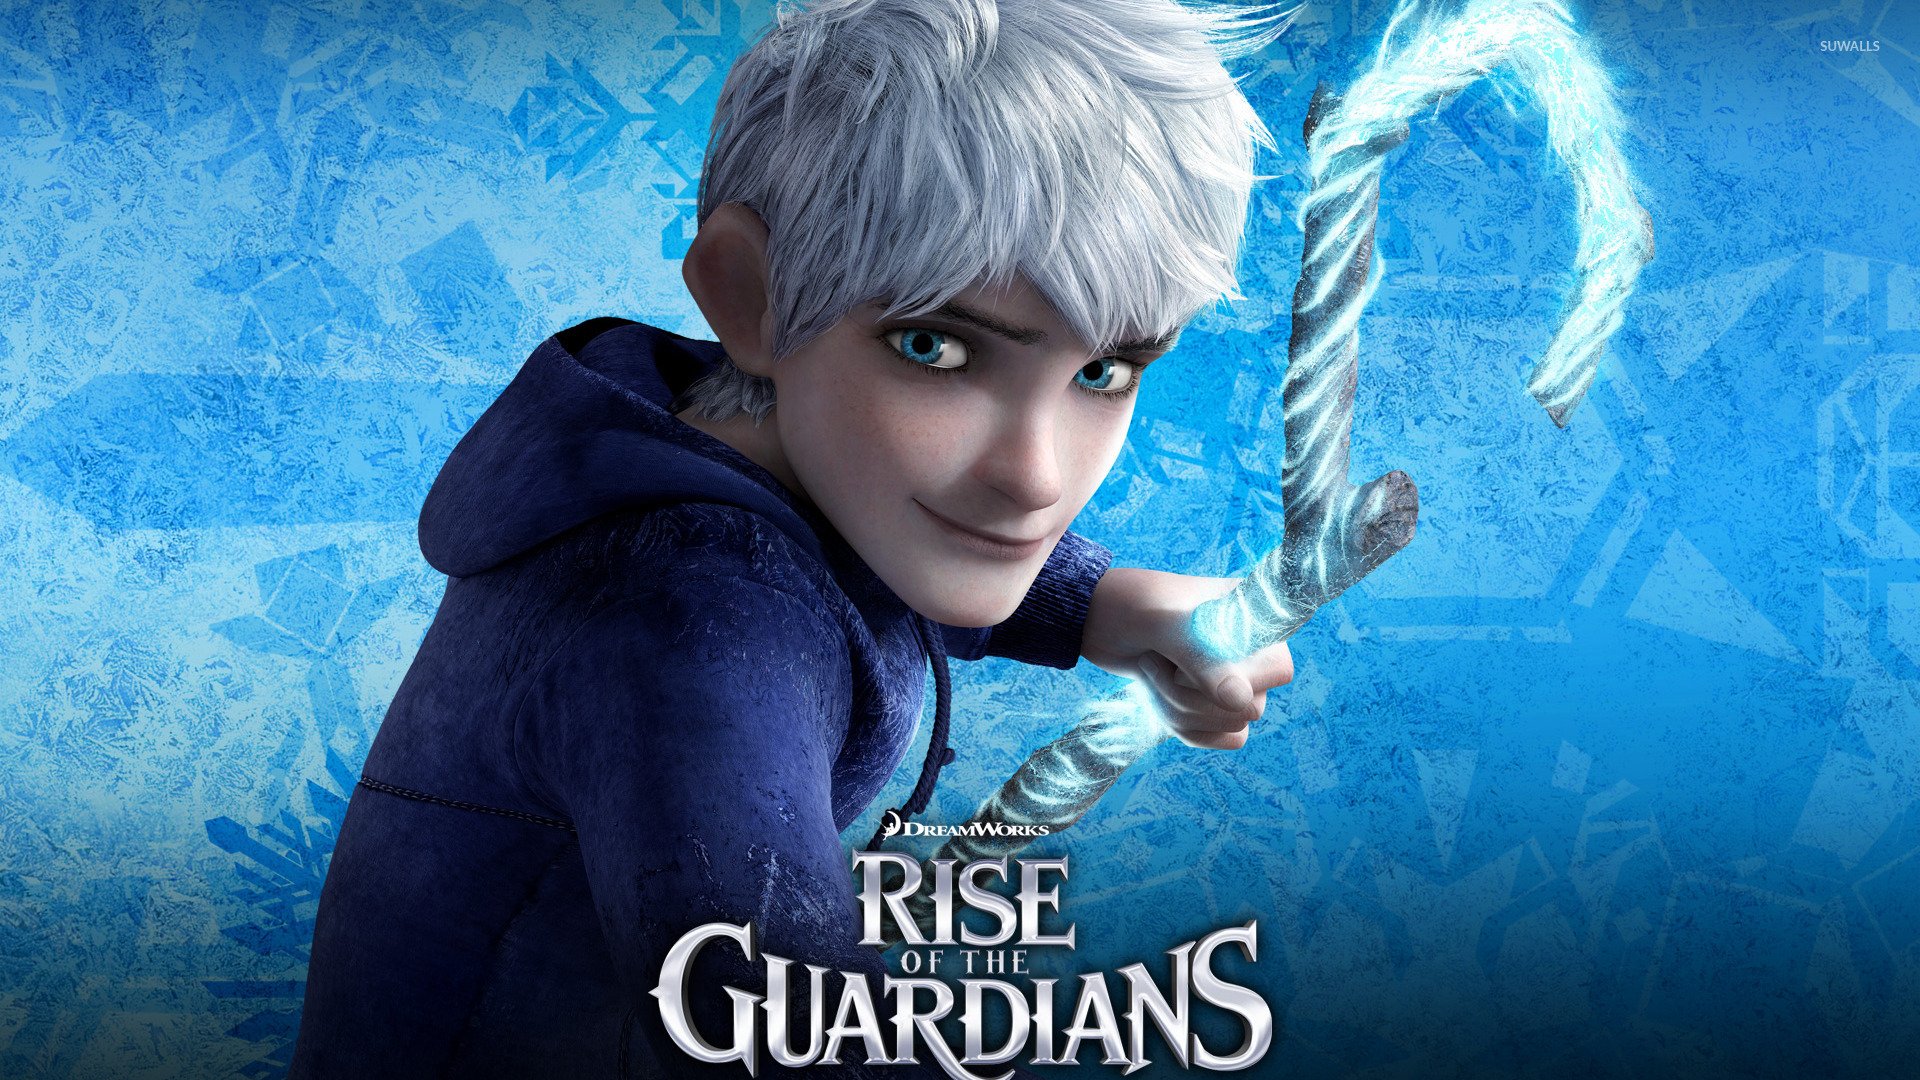 Jack Frost   Rise of the Guardians wallpaper   Cartoon wallpapers